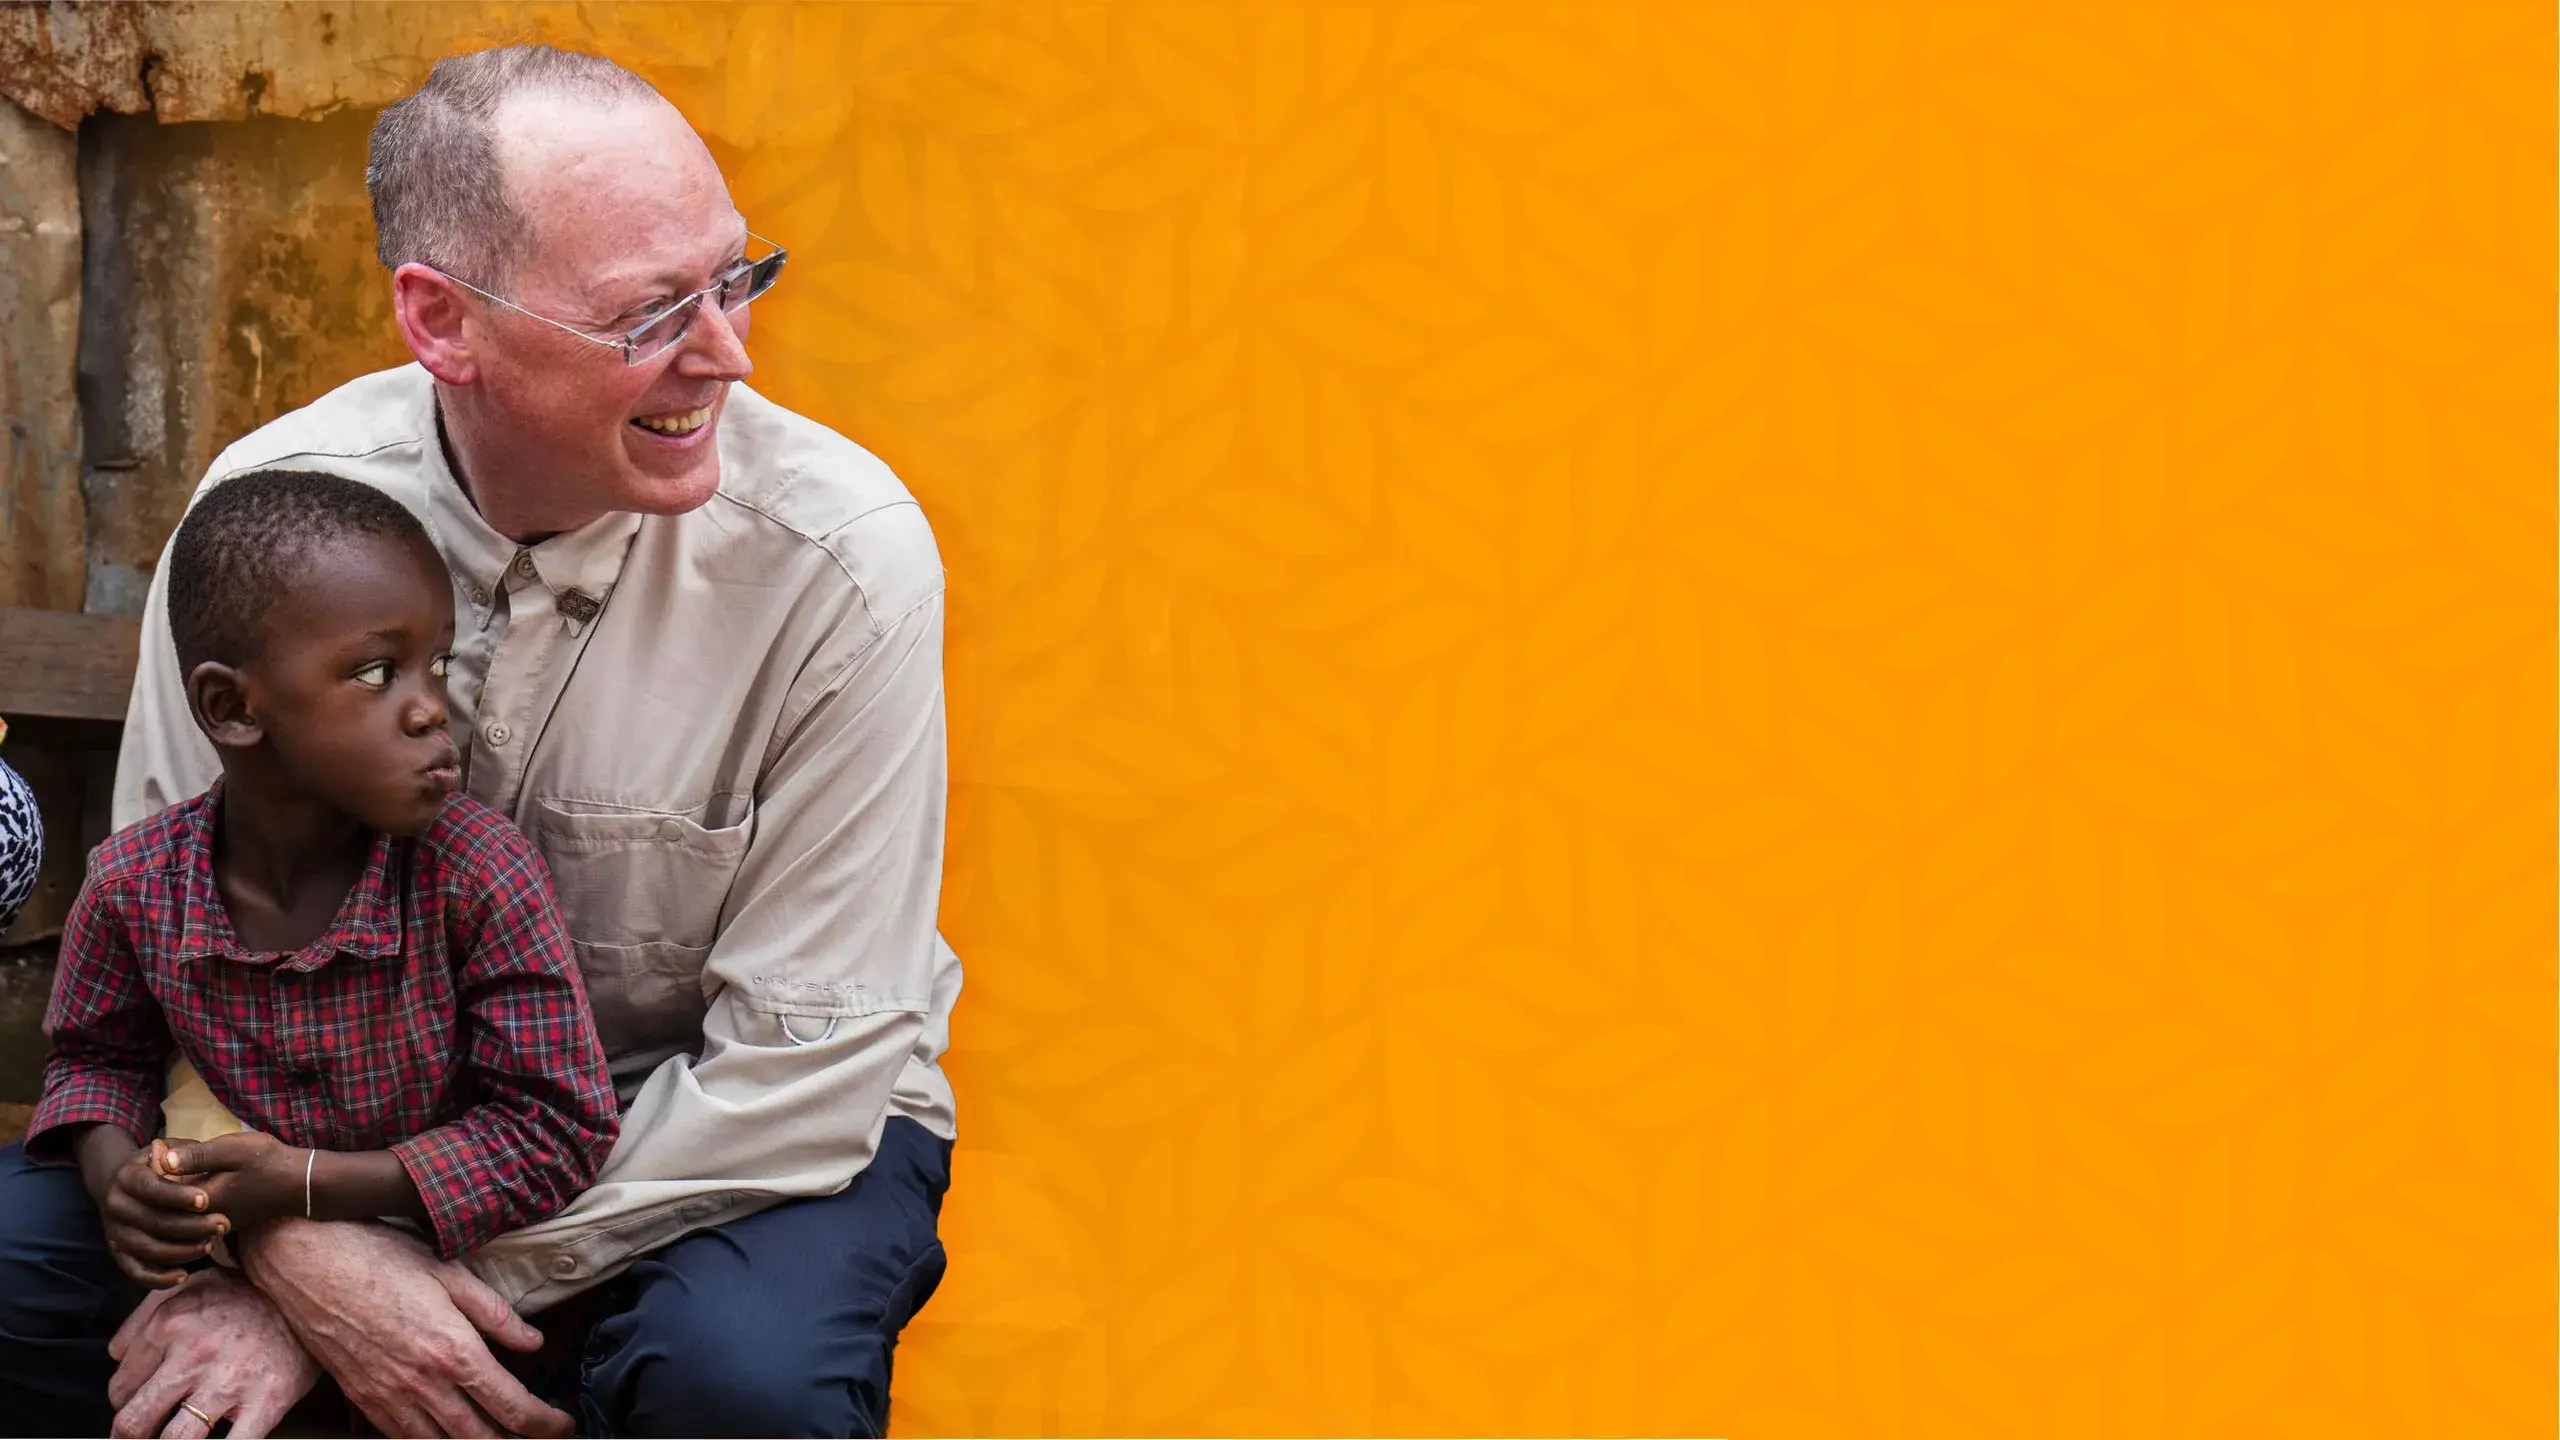 Dr. Paul Farmer sharing a moment with a child